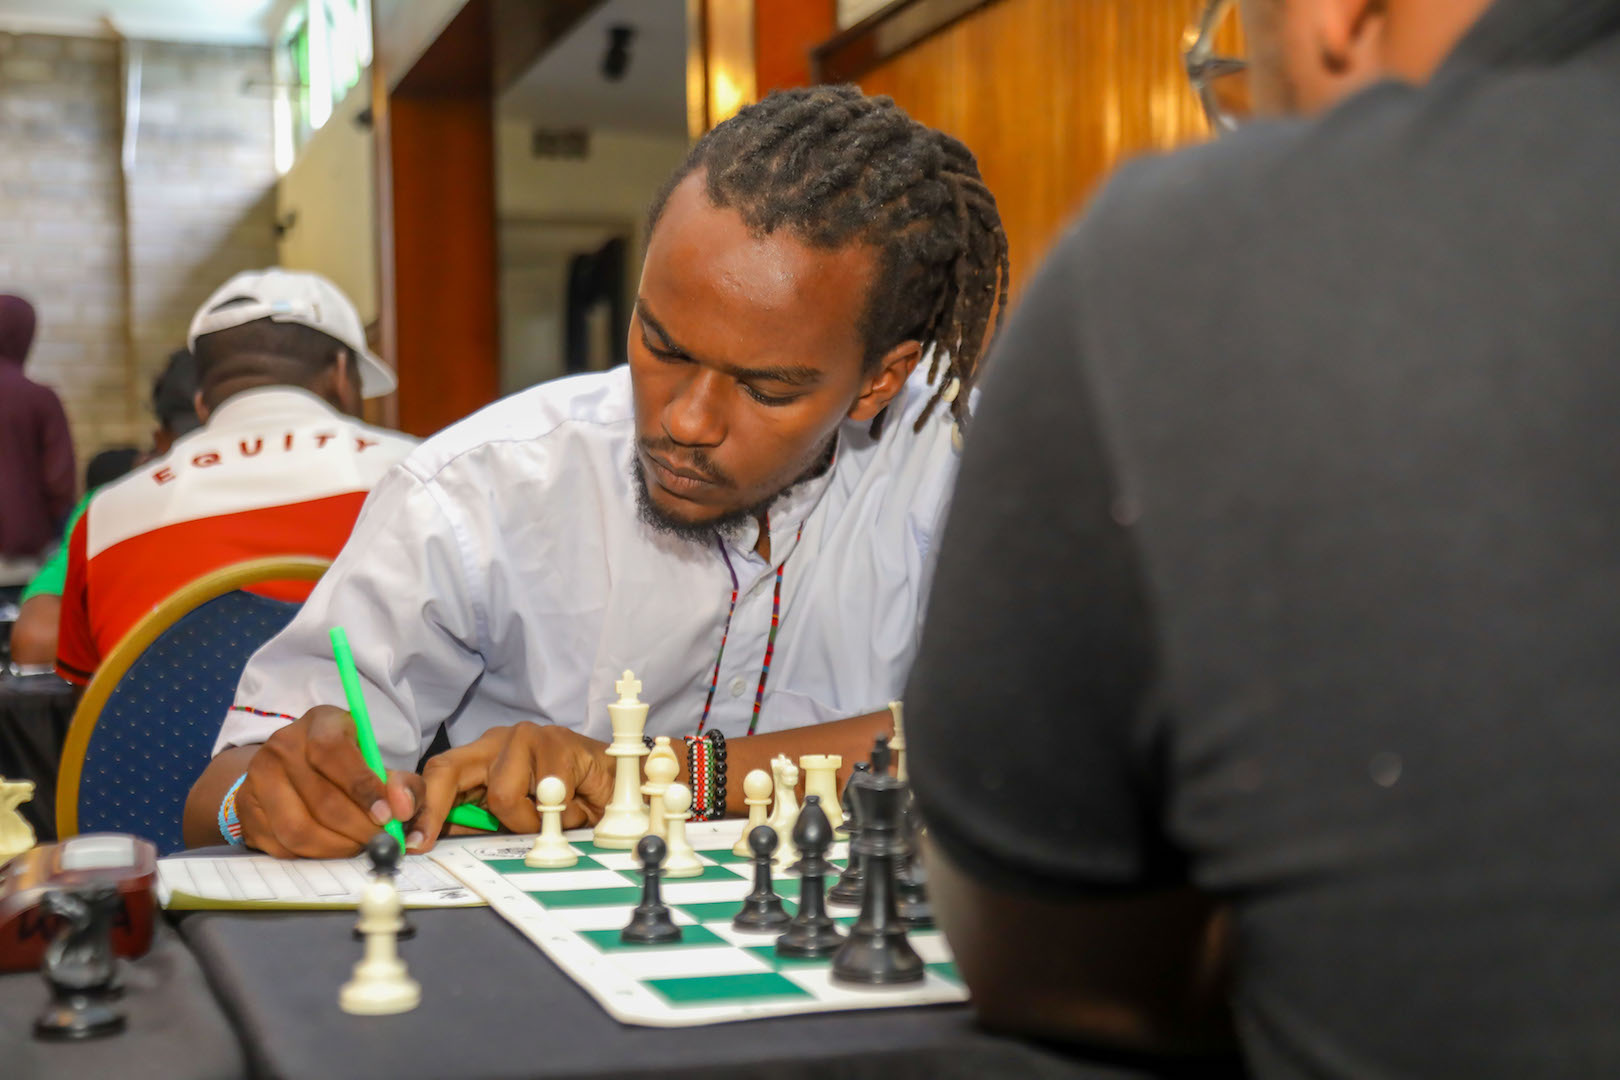 Kcb in search for glory at Kisumu chess open